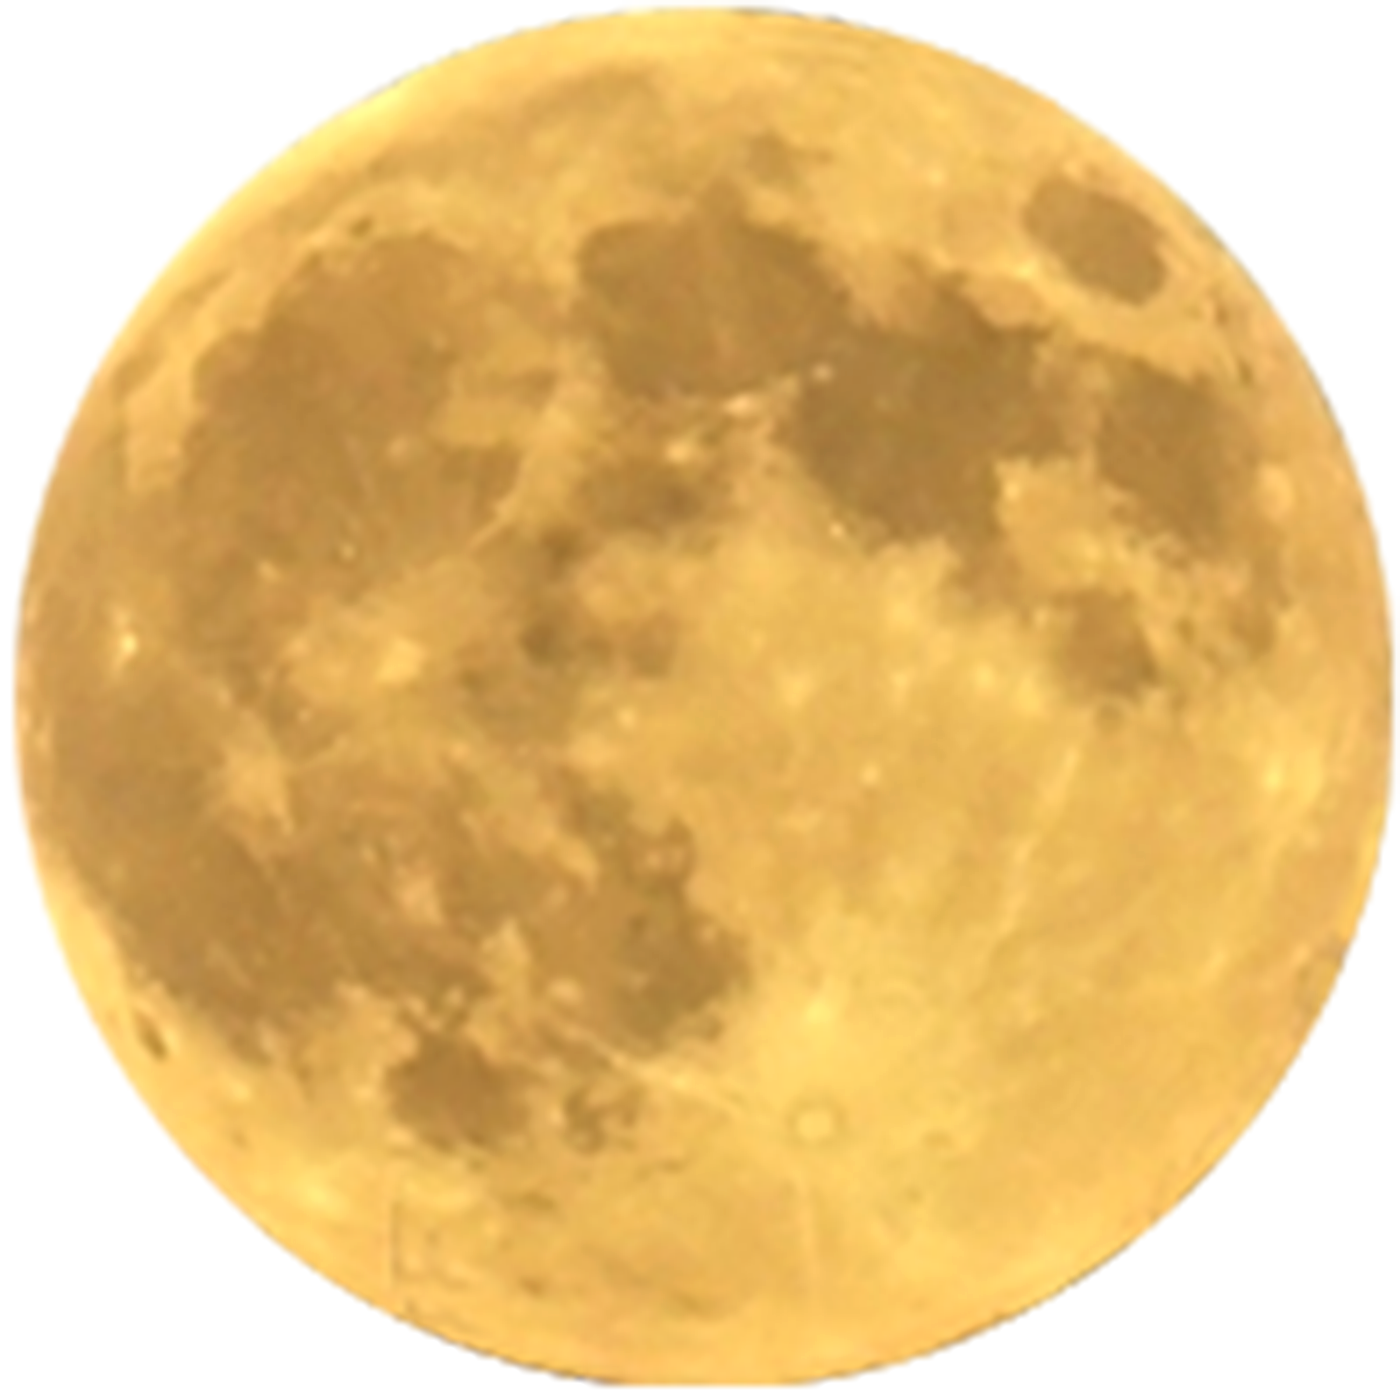 Full Moon PNG Image with Transparent Background